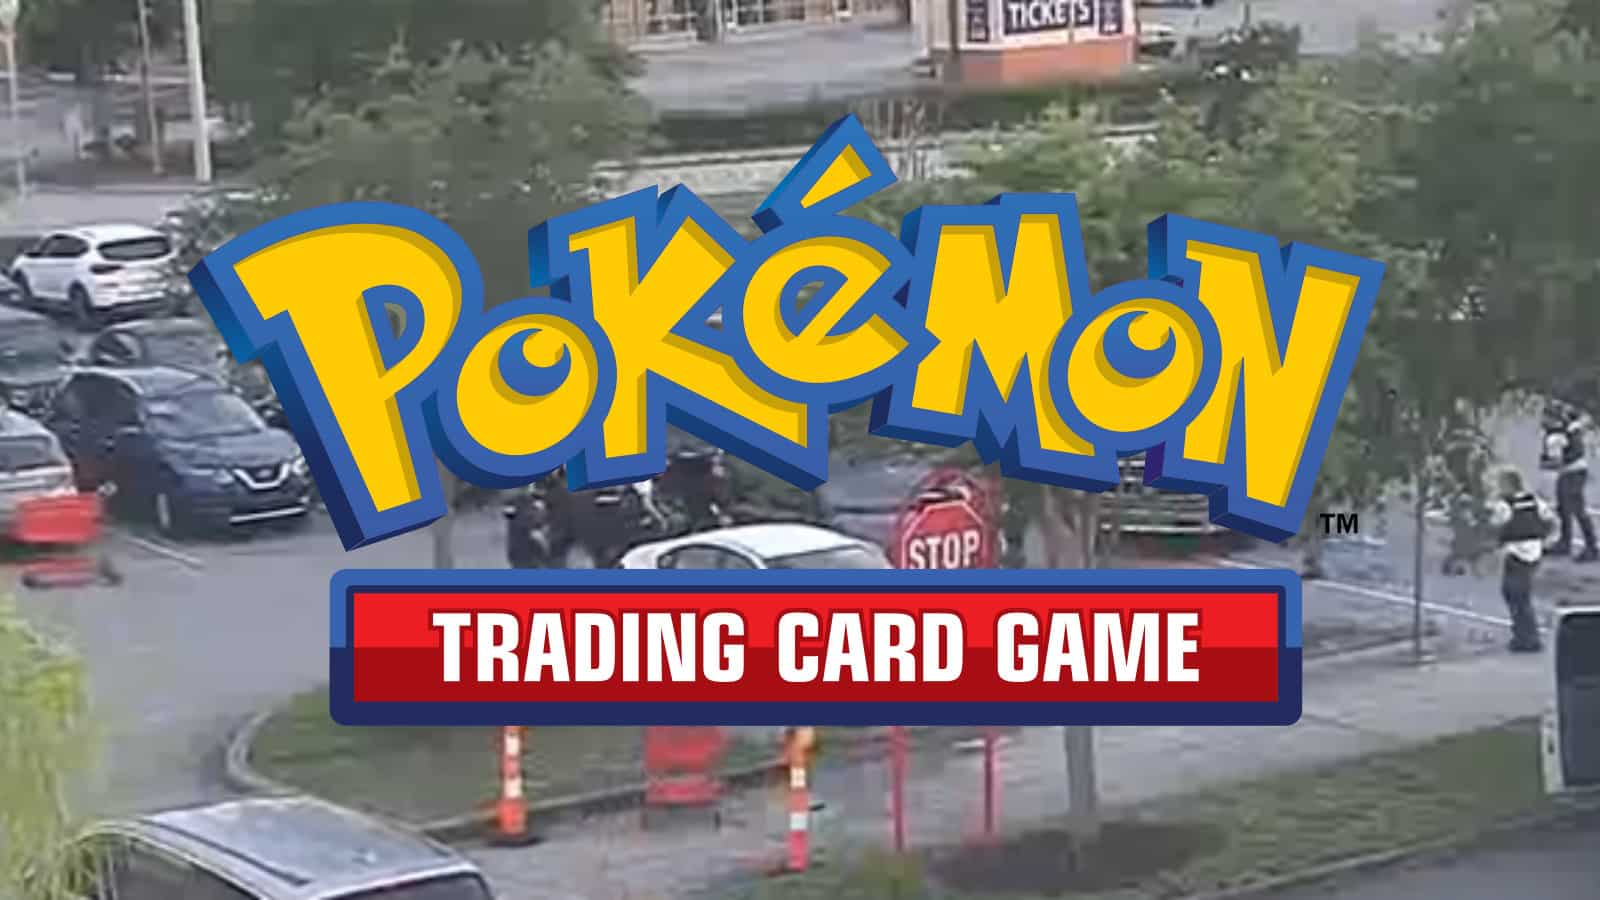 men shot at by police for allegedly stealing pokemon cards